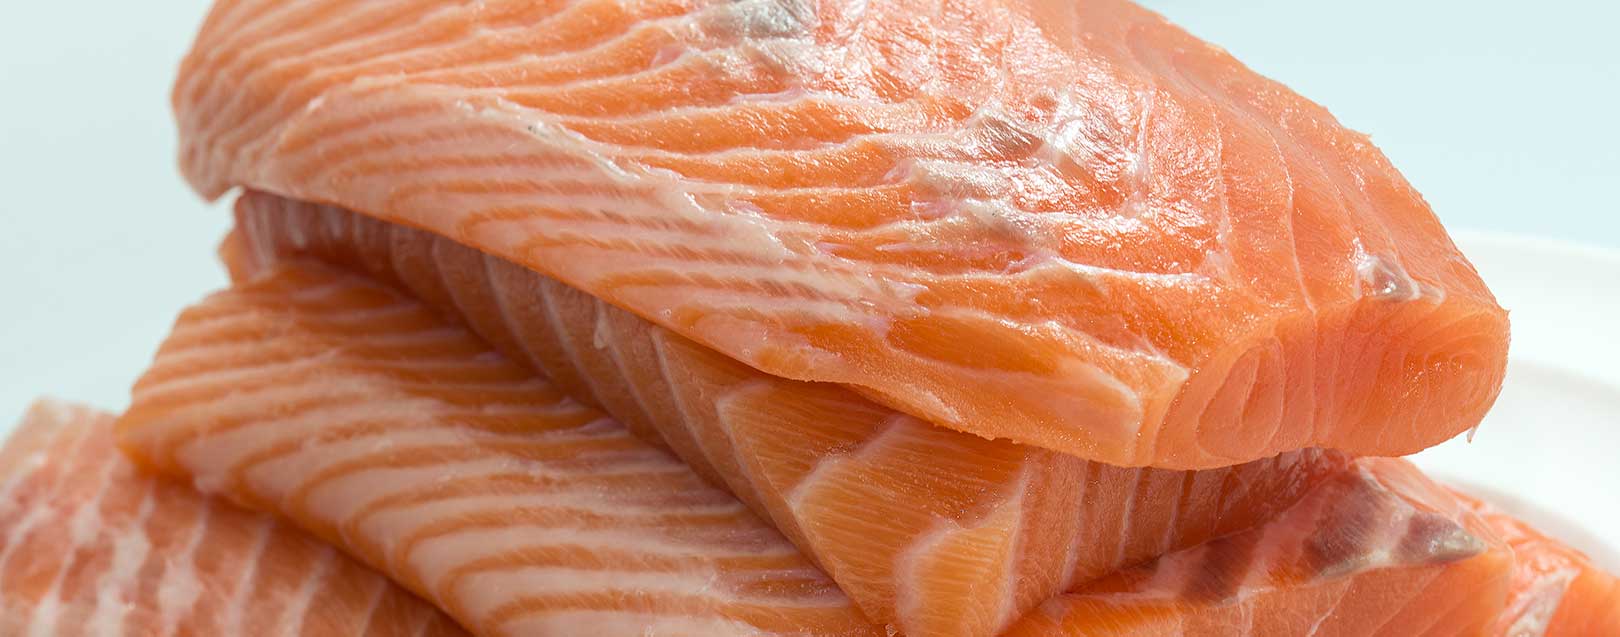 UK food exports reach a record high on surge in salmon sales